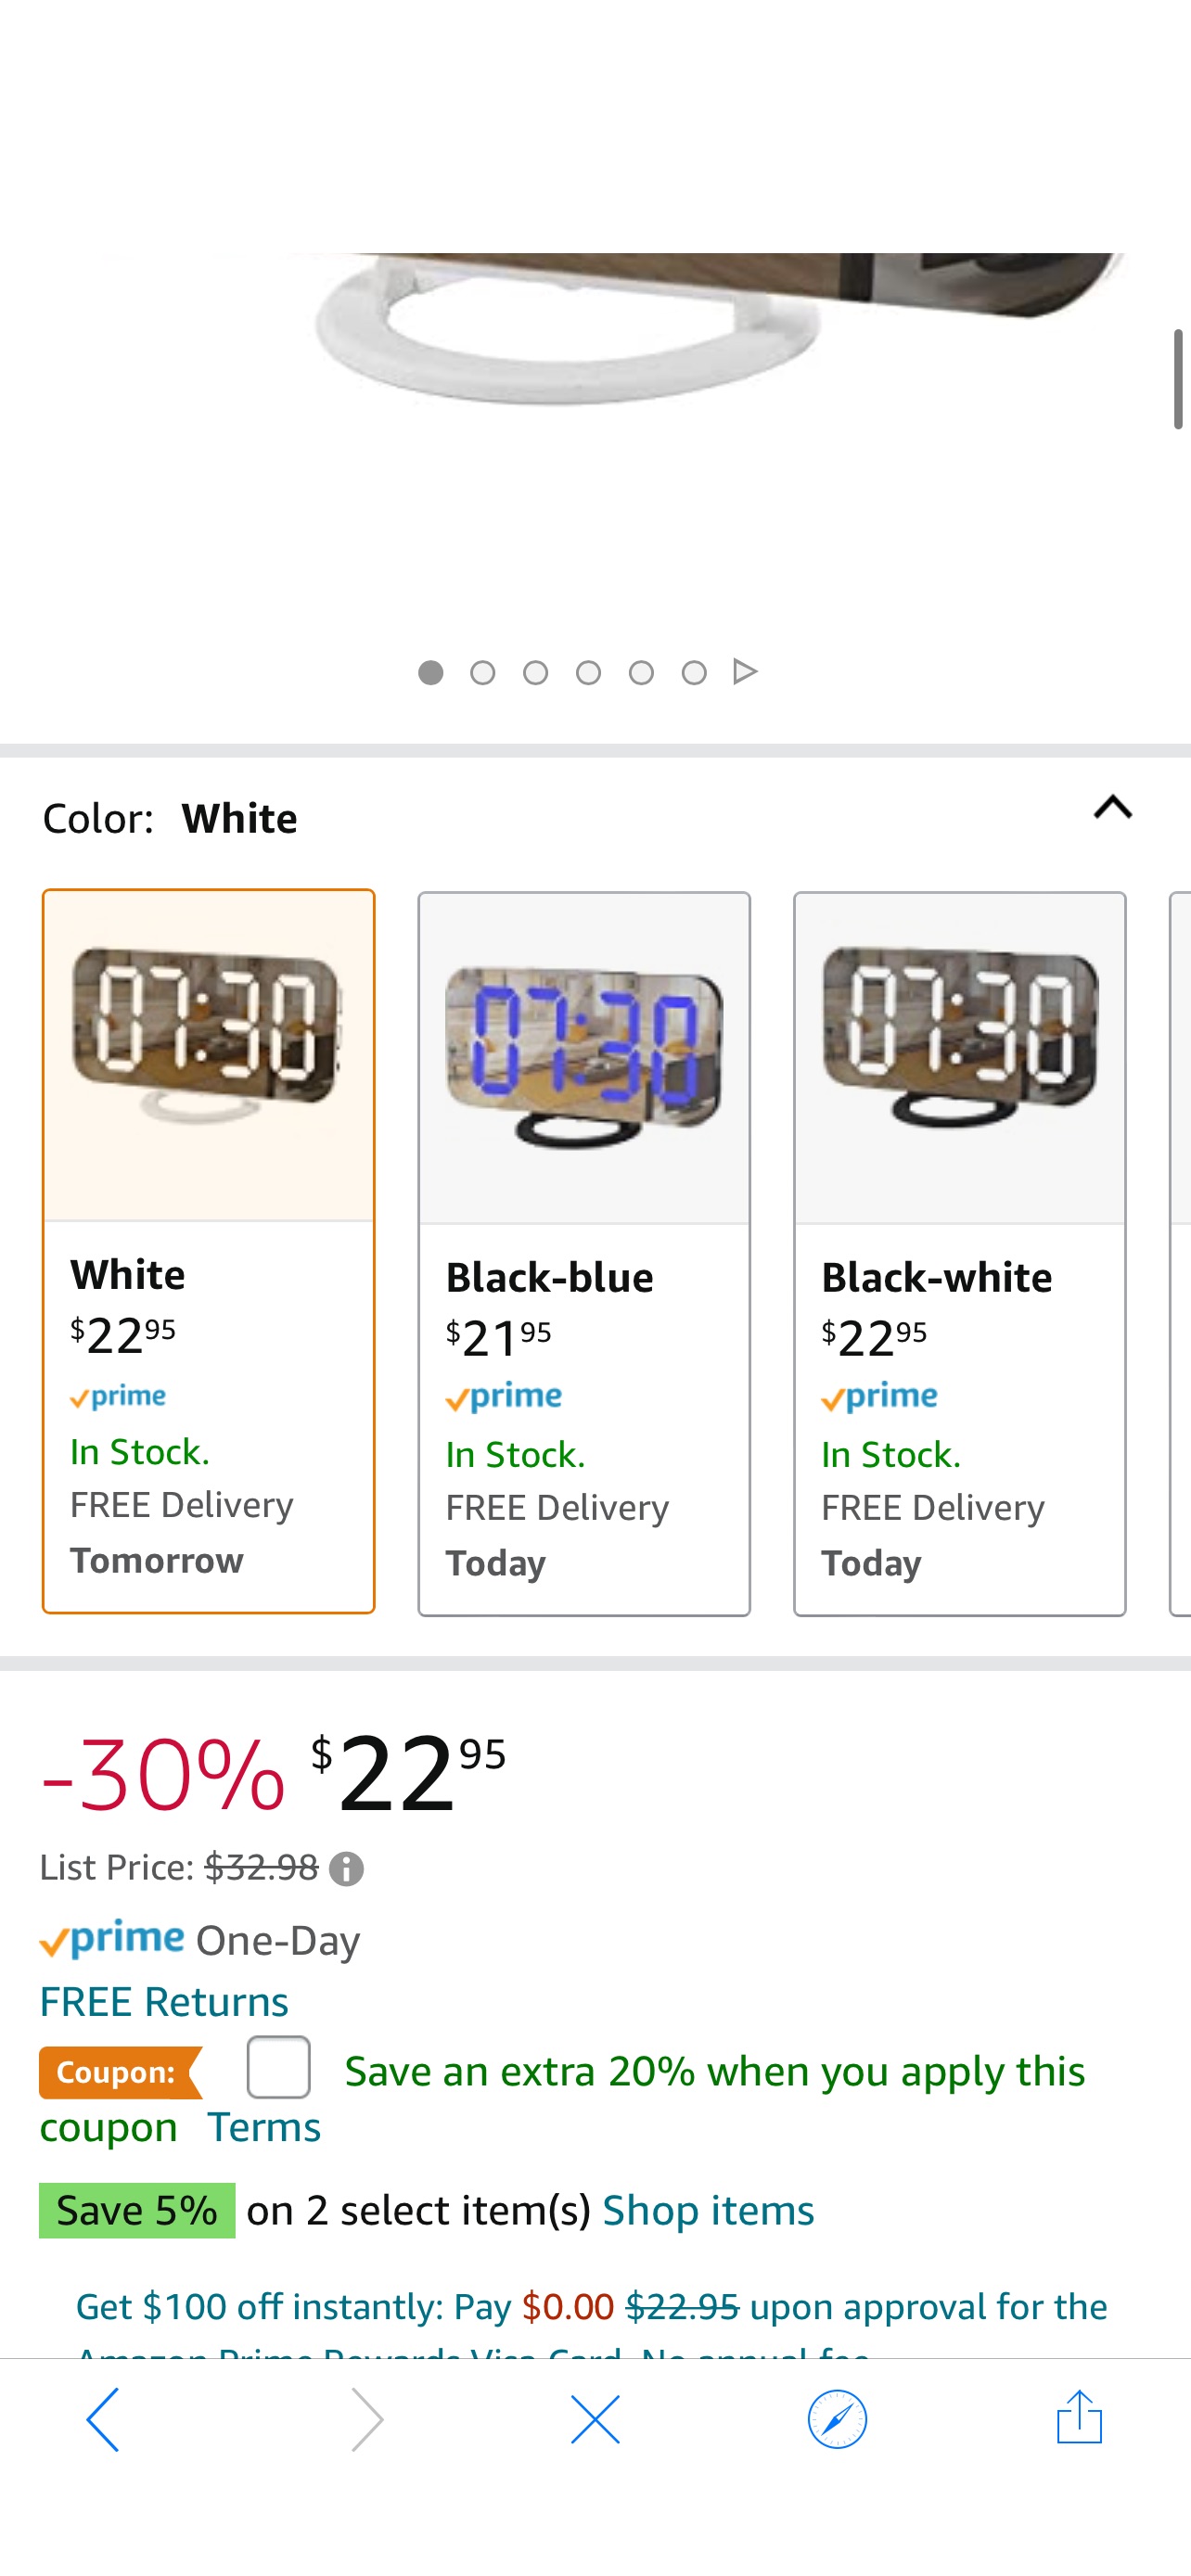 Amazon.com: Digital Clock Large Display, LED Electric Alarm Clocks Mirror Surface for Makeup with Diming Mode, 3 Levels Brightness, Dual USB Ports Modern Decoration: Home & Kitchen